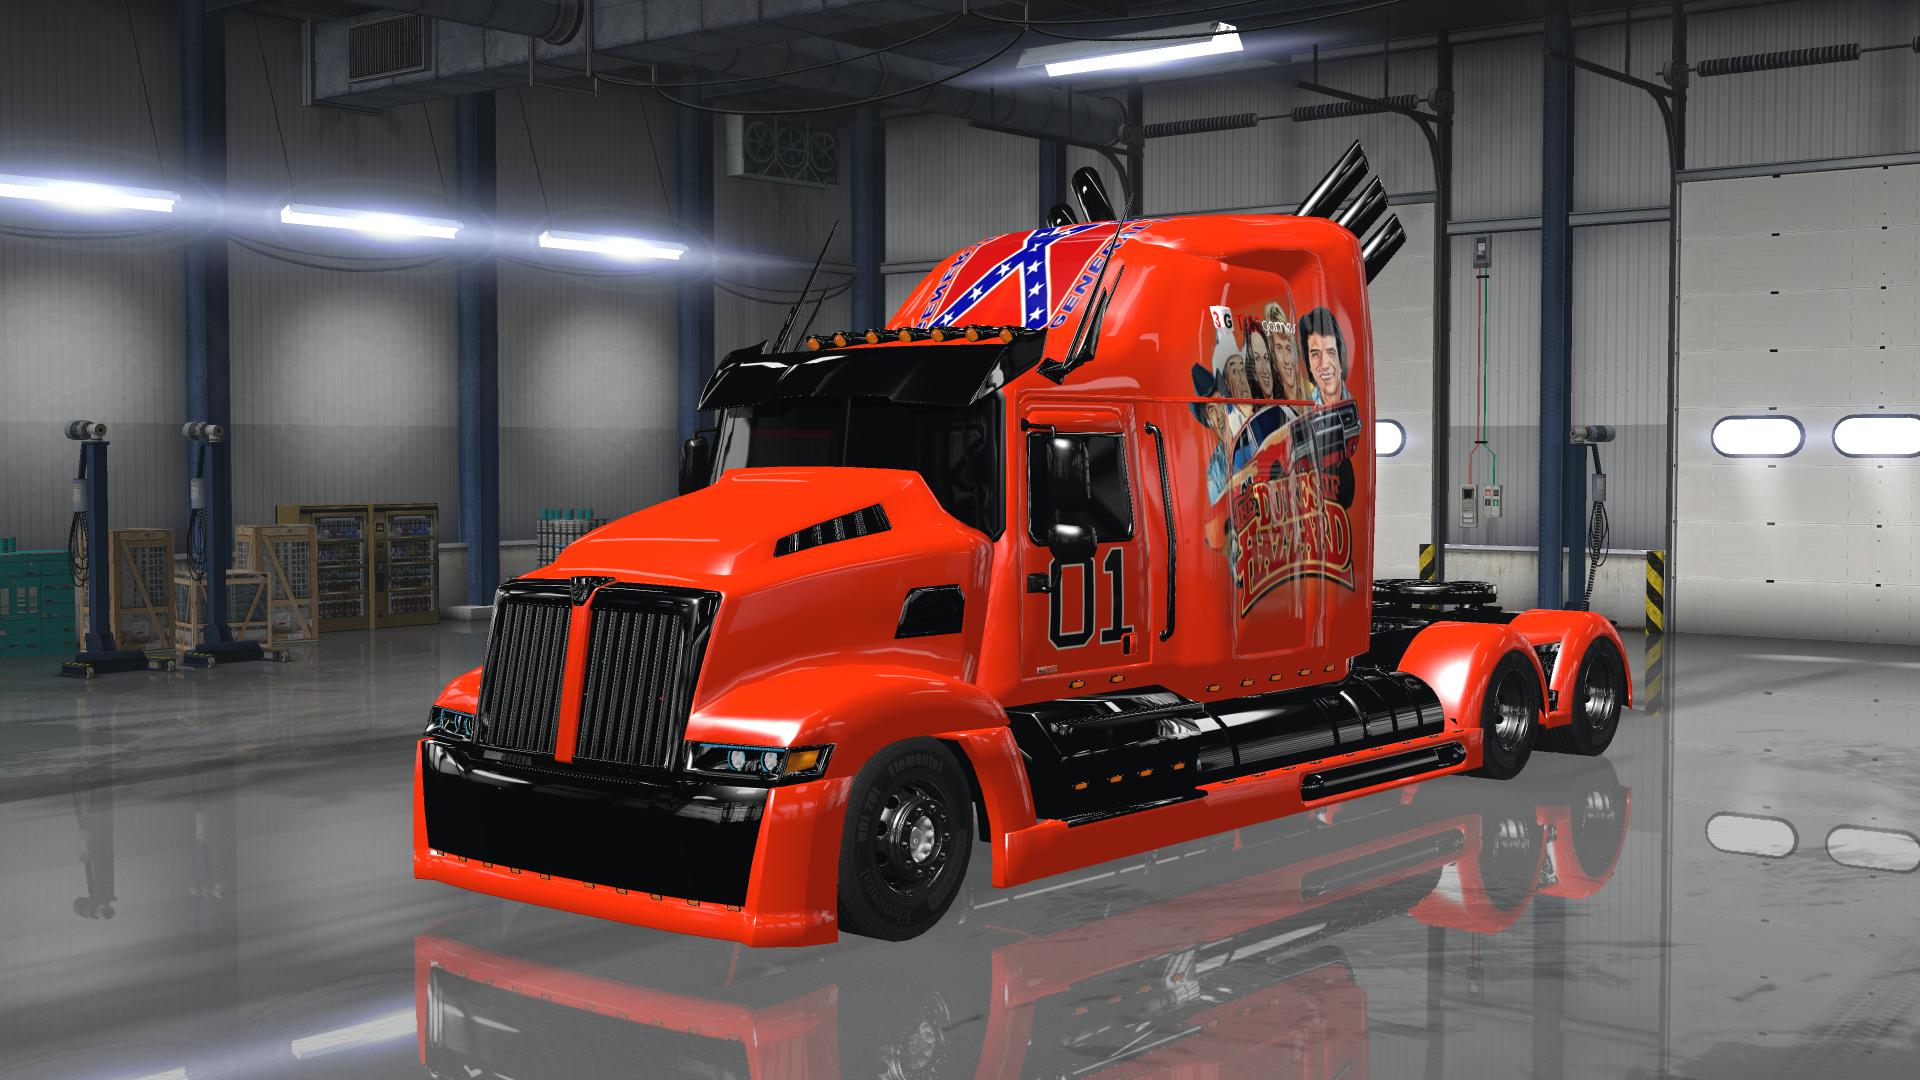 Wester Star 5700 Optimus Prime v1.4 for ATS • ATS mods | American truck